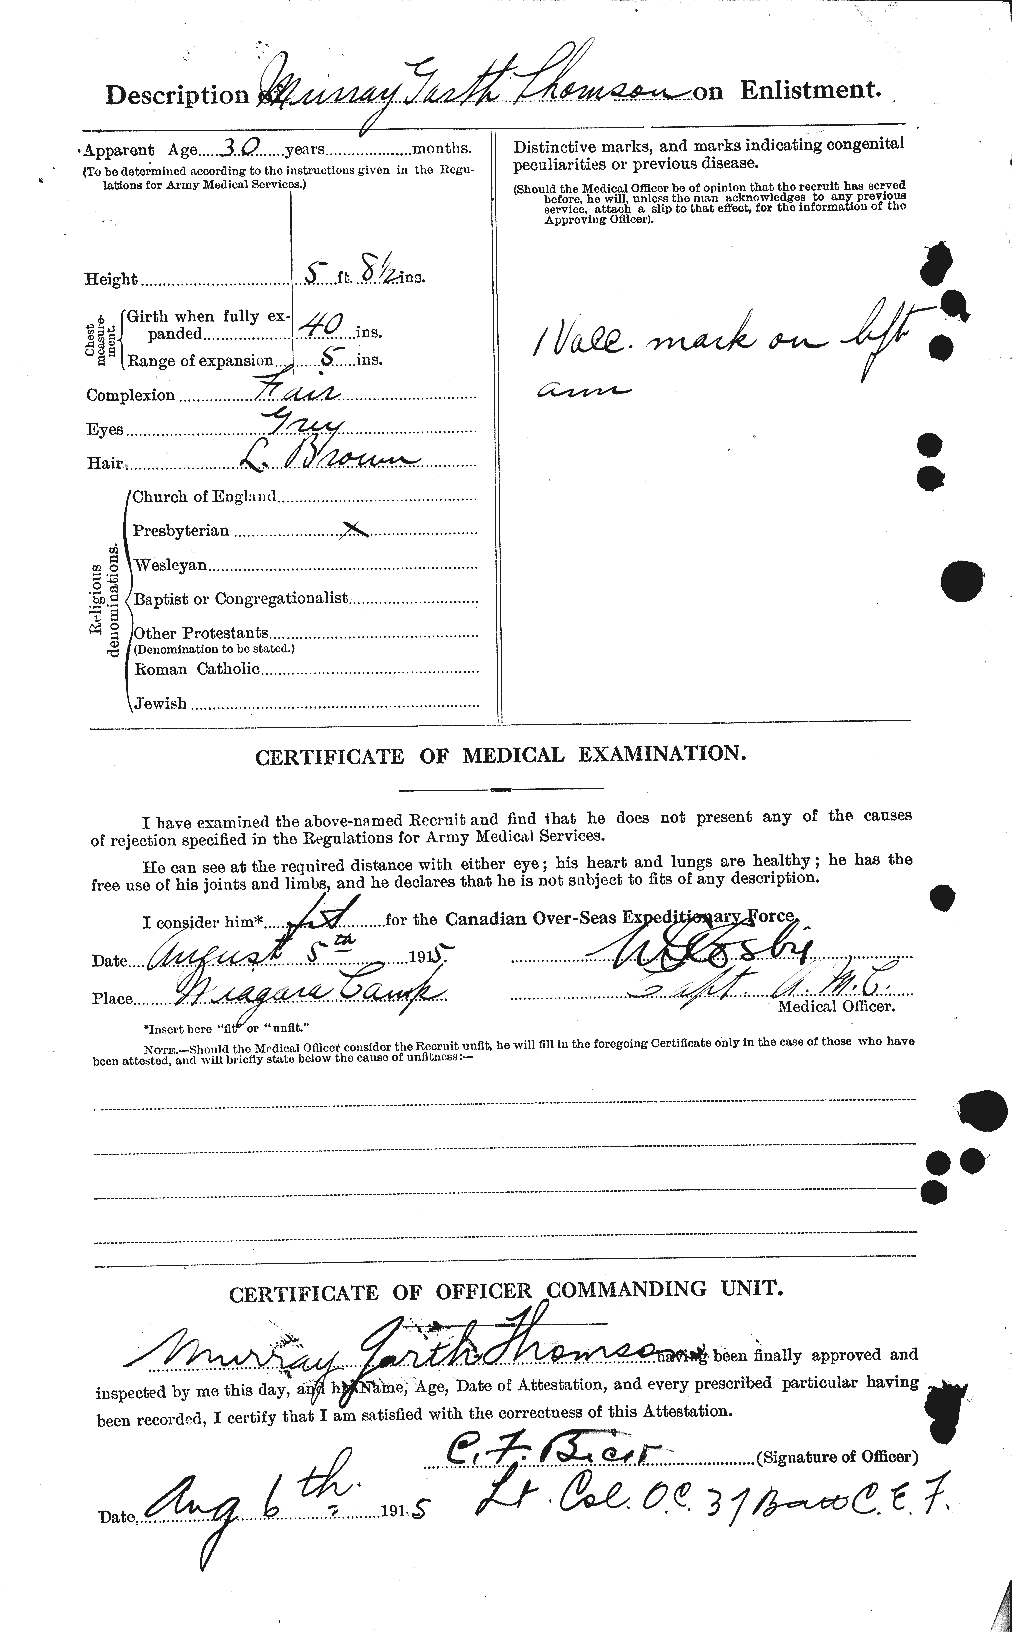 Personnel Records of the First World War - CEF 633460b